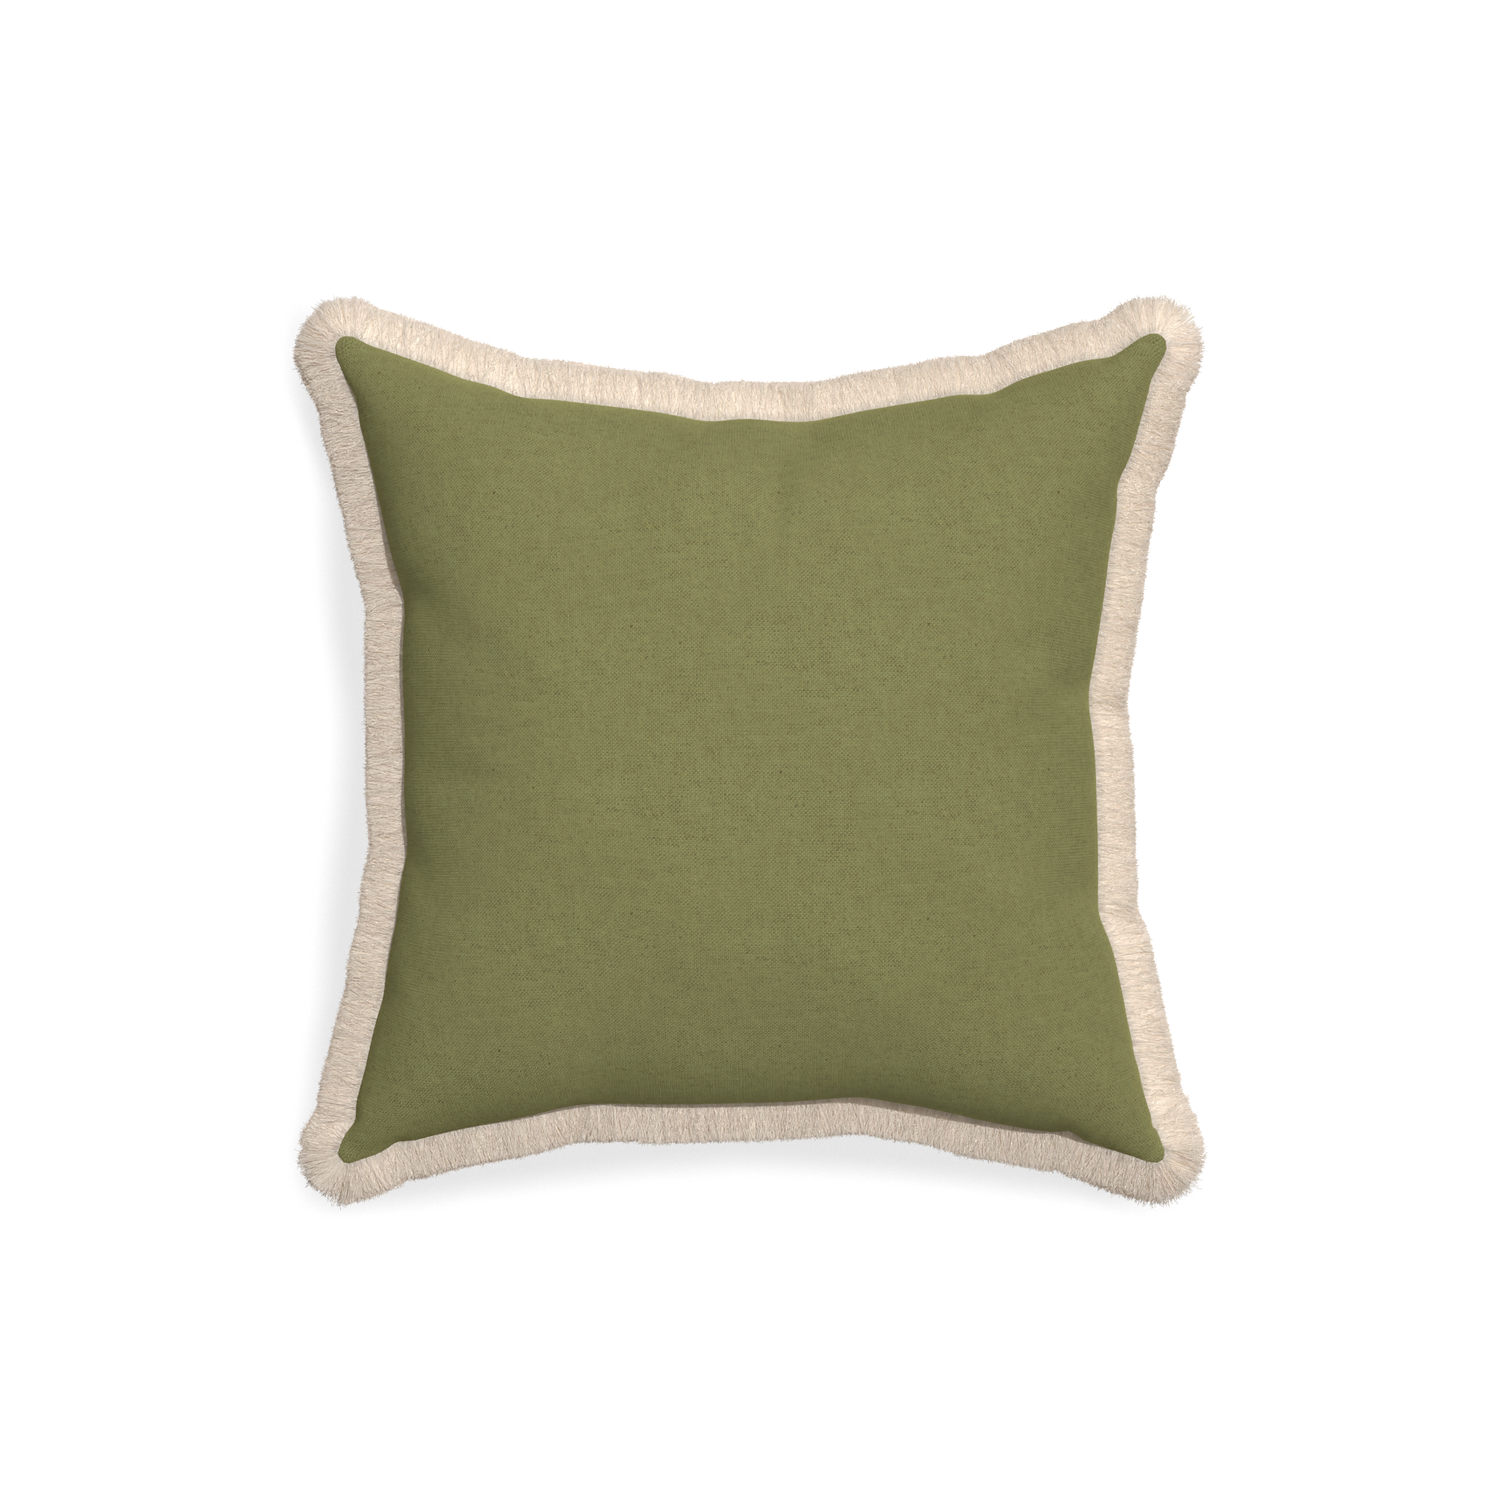 18-square moss custom moss greenpillow with cream fringe on white background